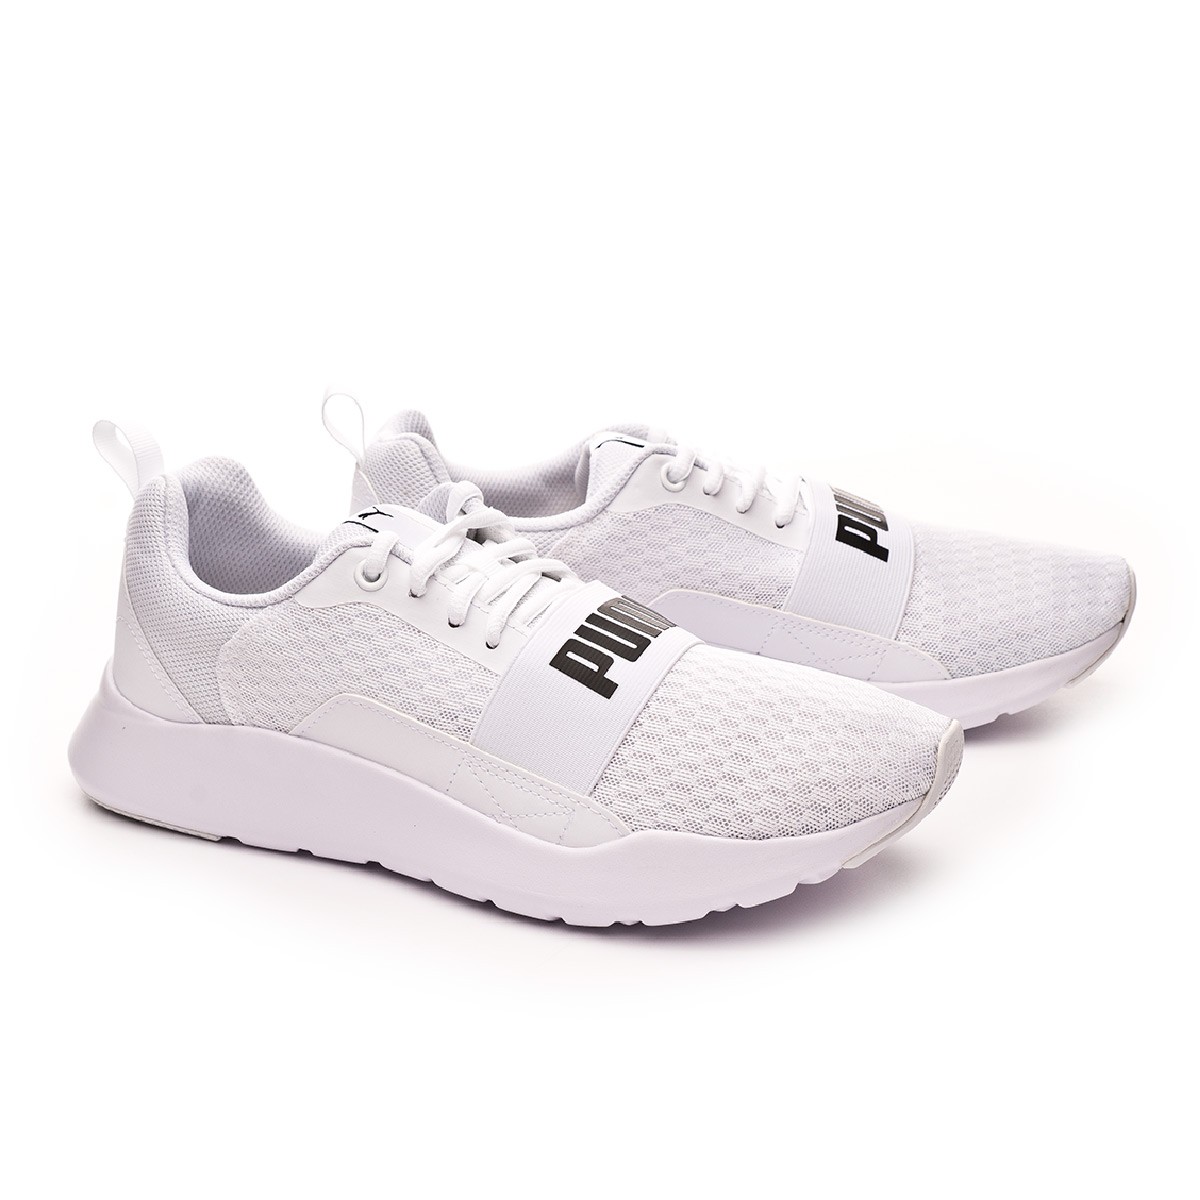 Trainers Puma Wired White - Football 